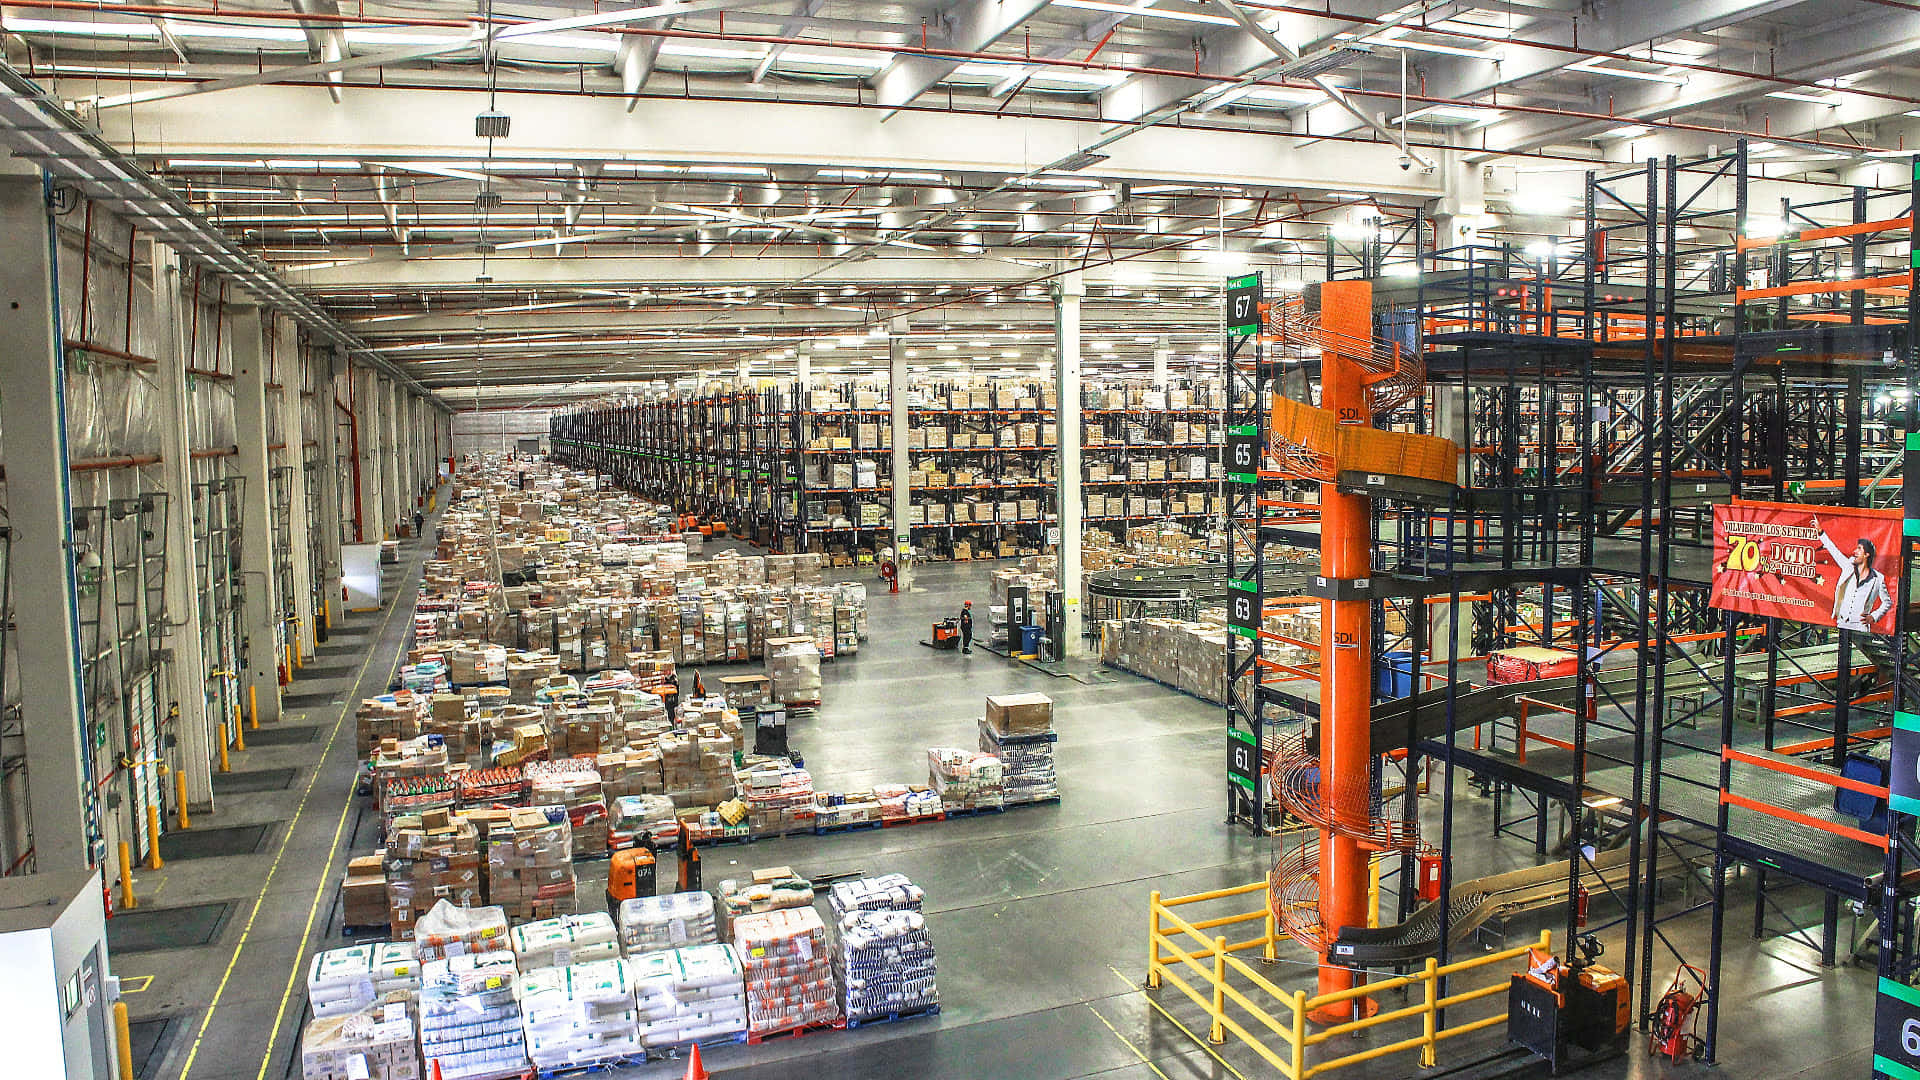 A Warehouse With Many Boxes And Shelves